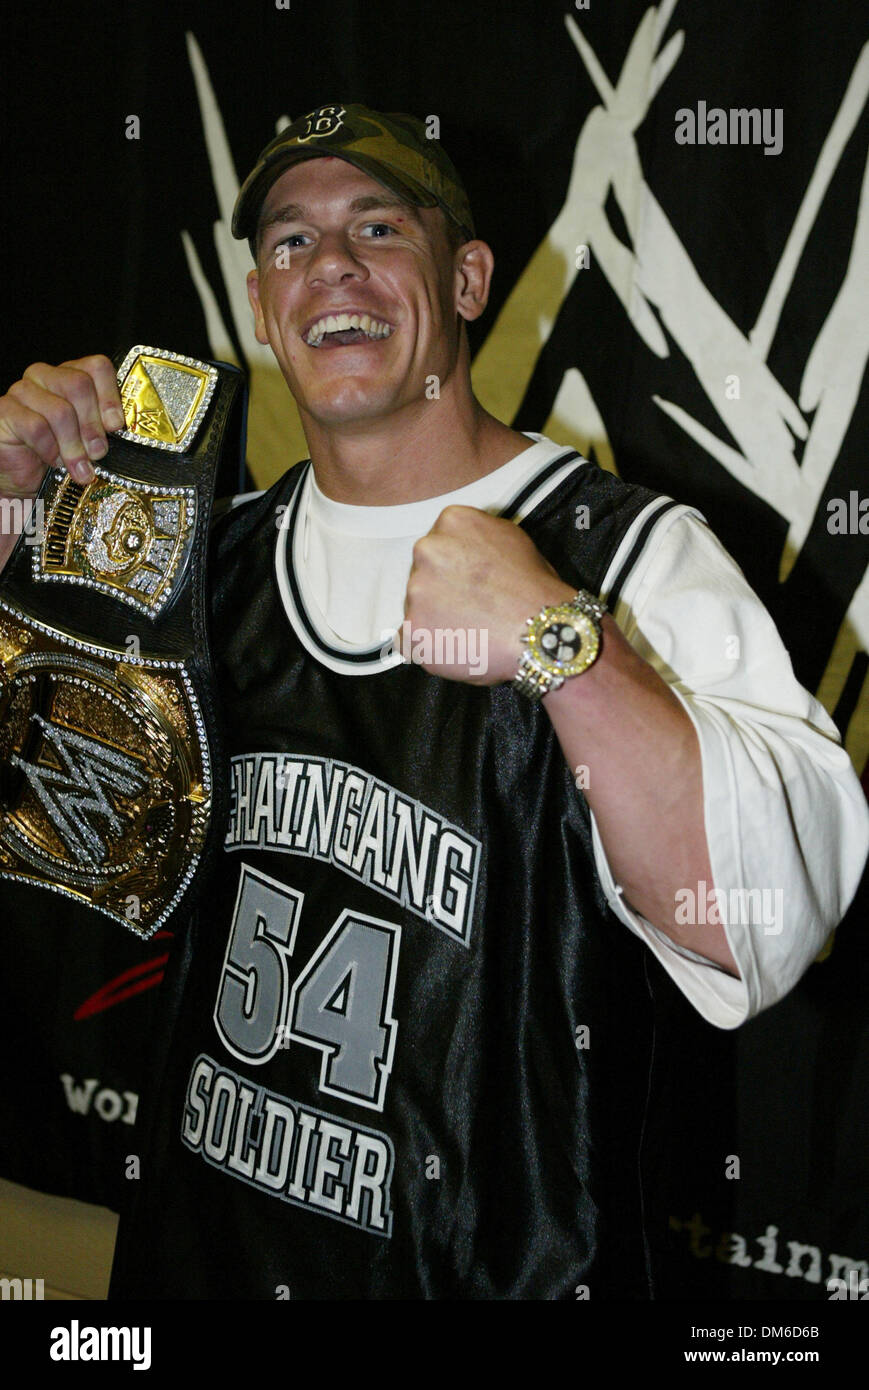 Jun 21, 2005; Las Vegas, NV, USA; WWE Champion JOHN CENA with Championship  Belt at the WWE press conference at the Thomas and Mack Center in Las Vegas  for the up coming '